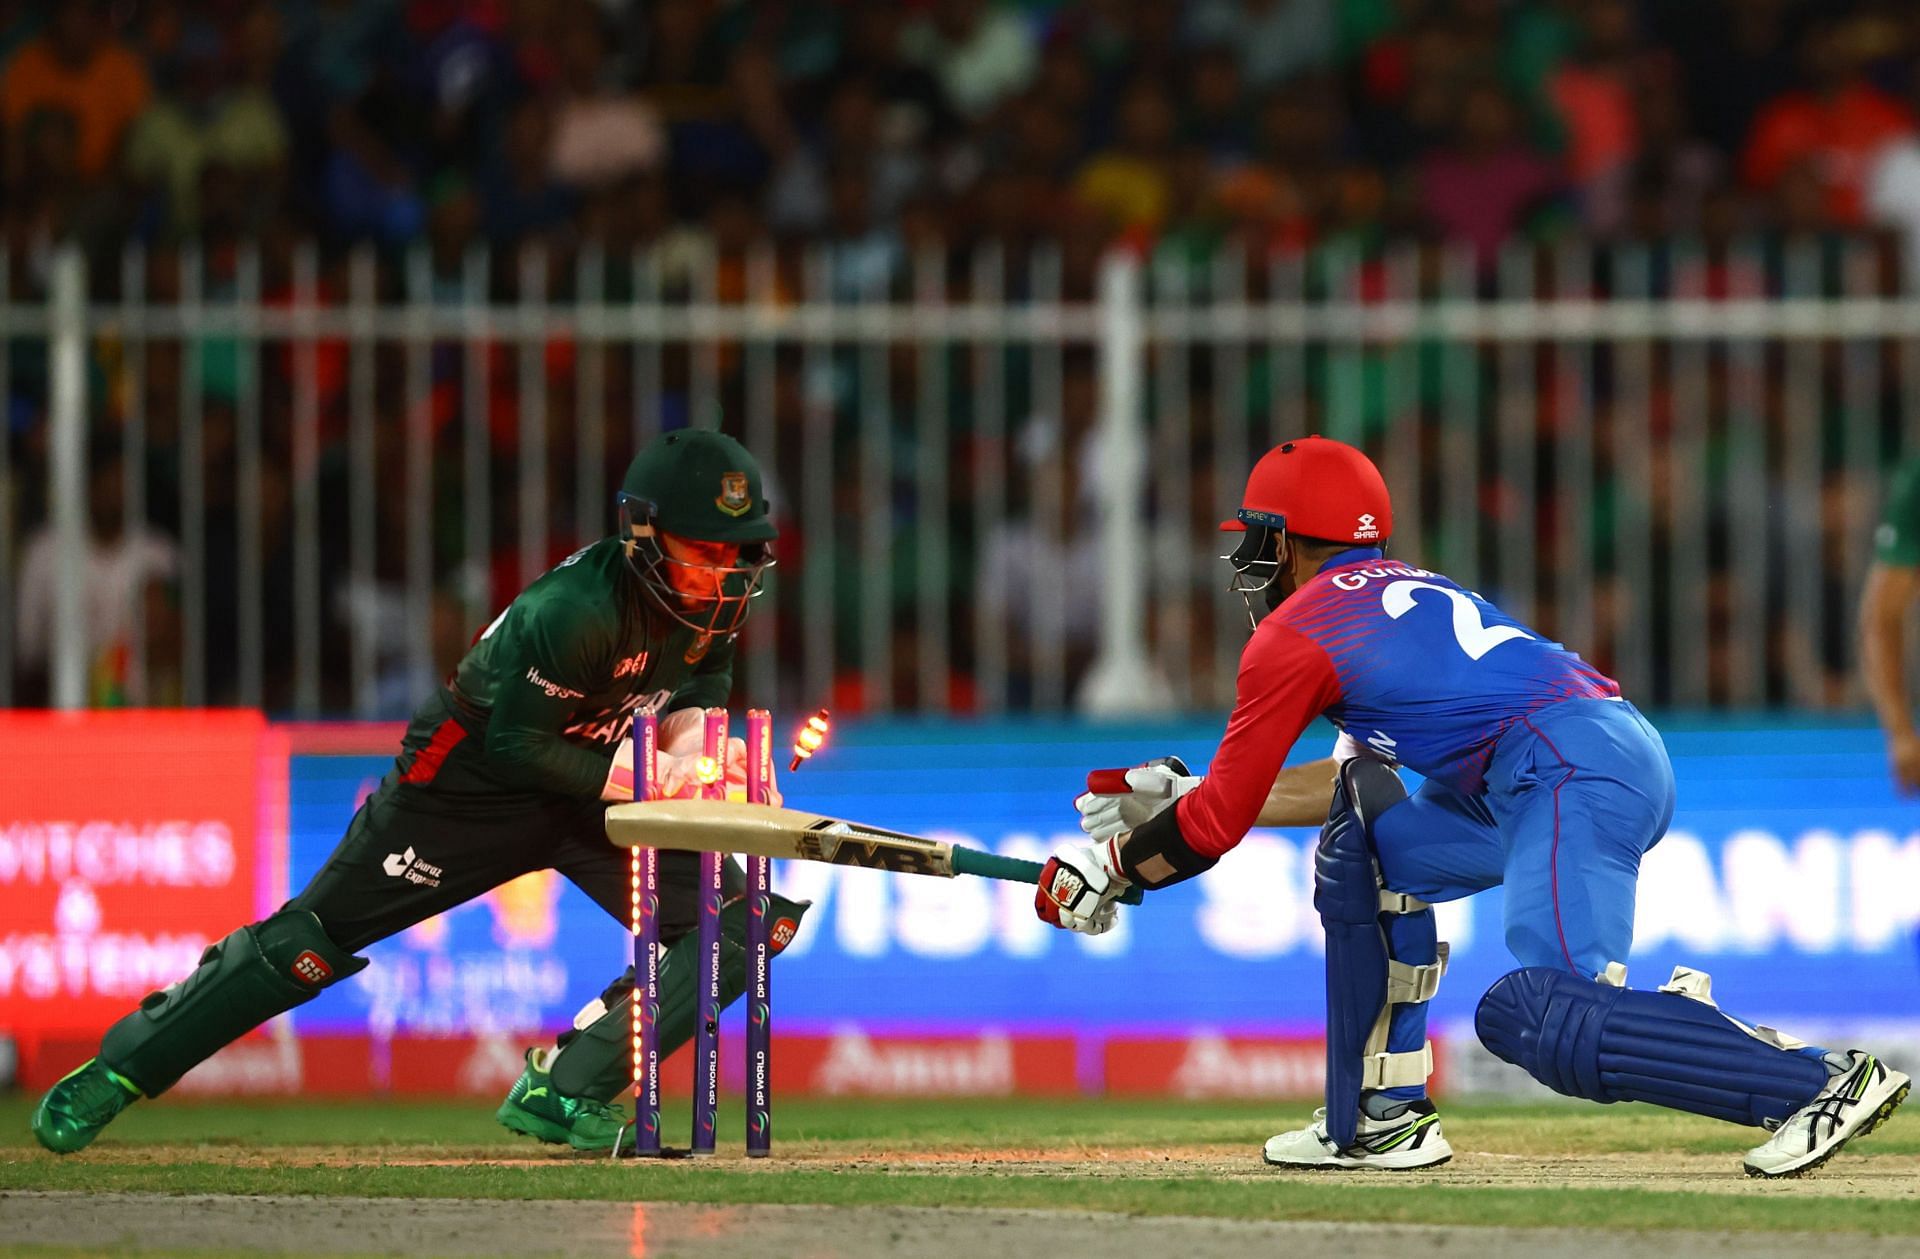 Rahmanullah Gurbaz is stumped during the game against Bangladesh. Pic: Getty Images